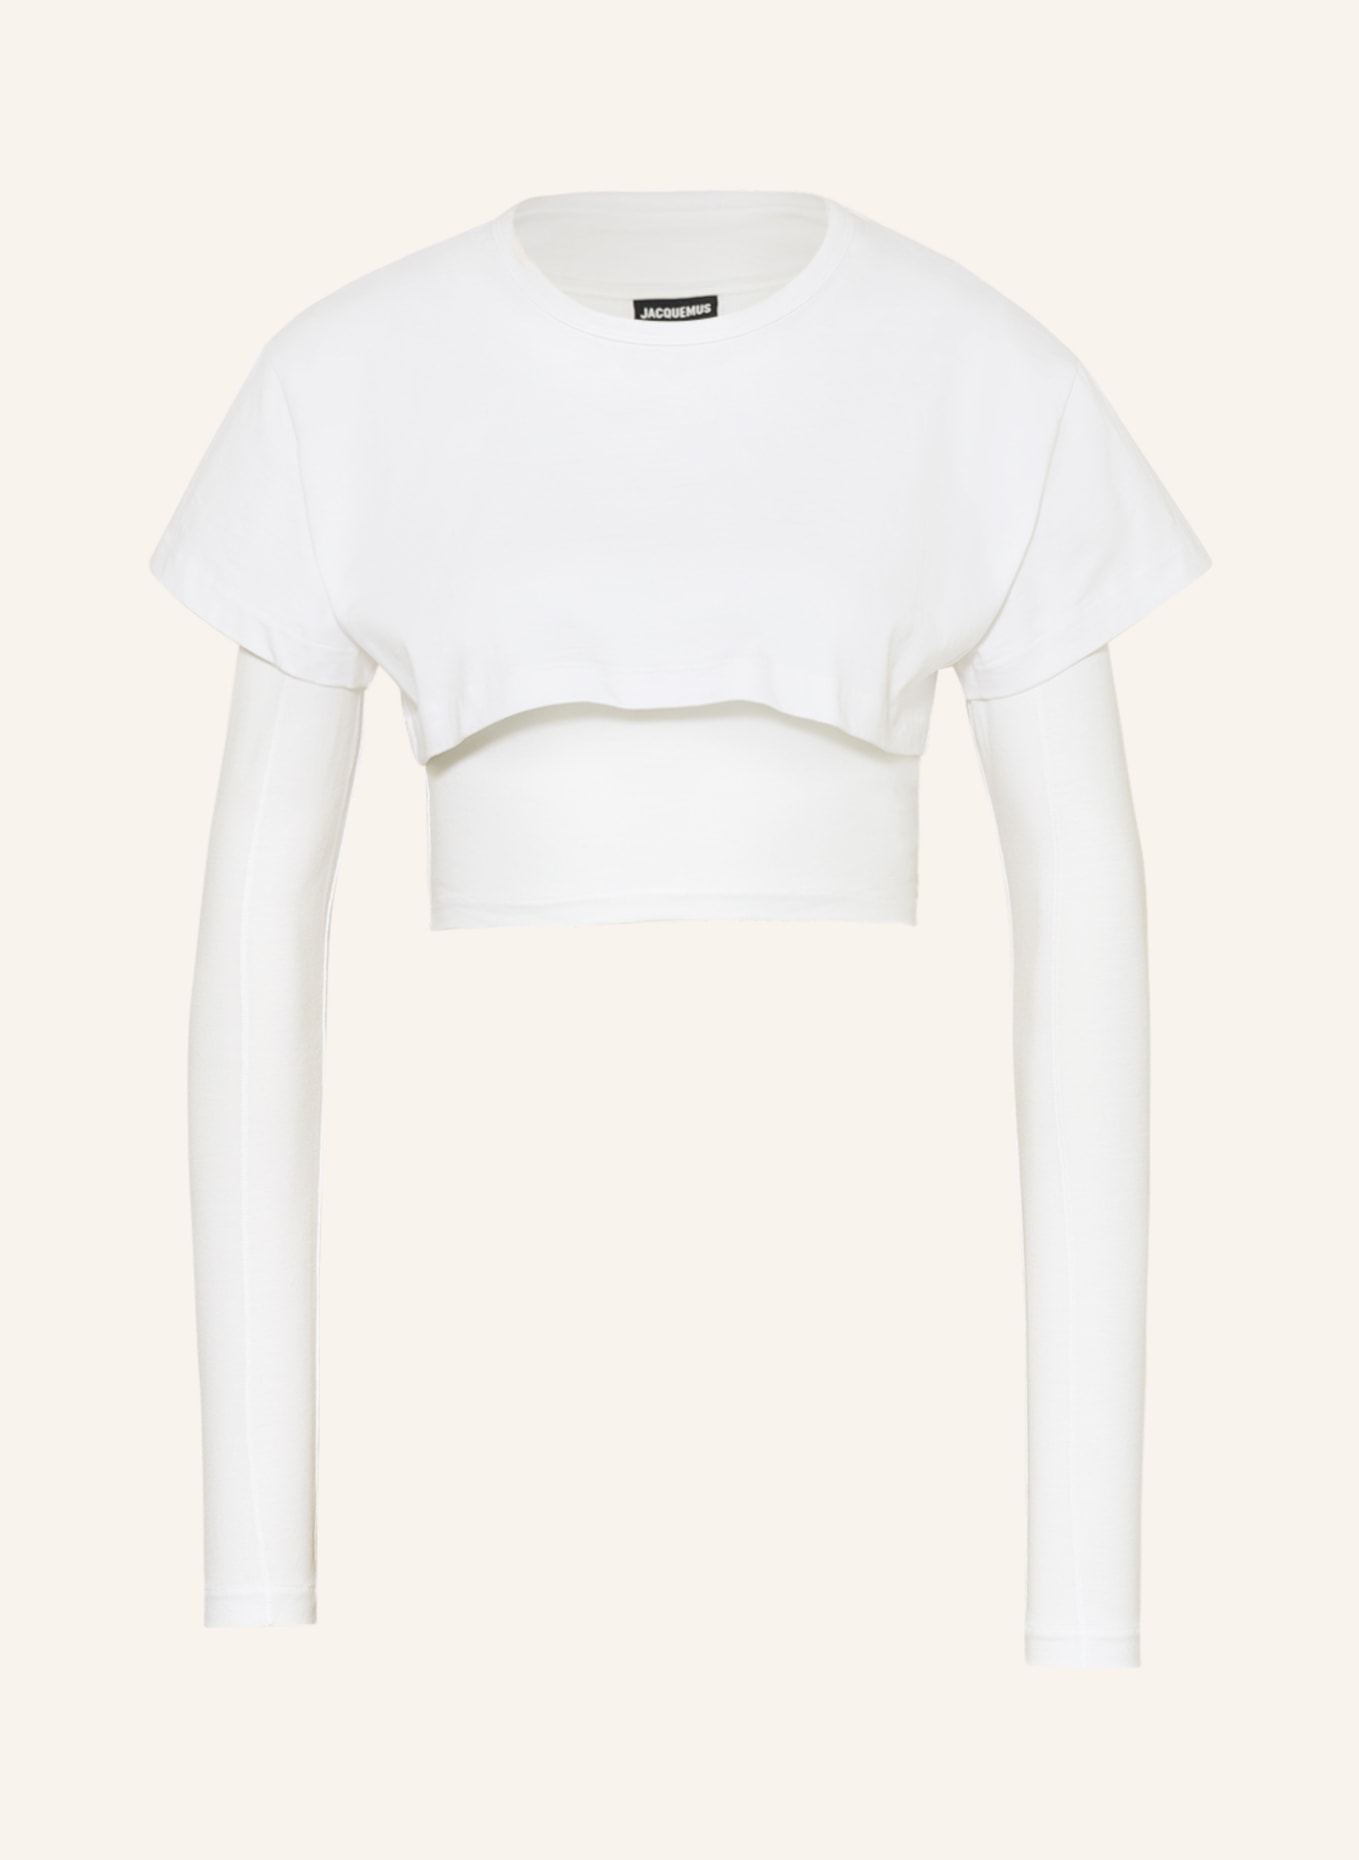 JACQUEMUS Cropped-Longsleeve LE DOUBLE T-SHIRT, Farbe: WEISS (Bild 1)